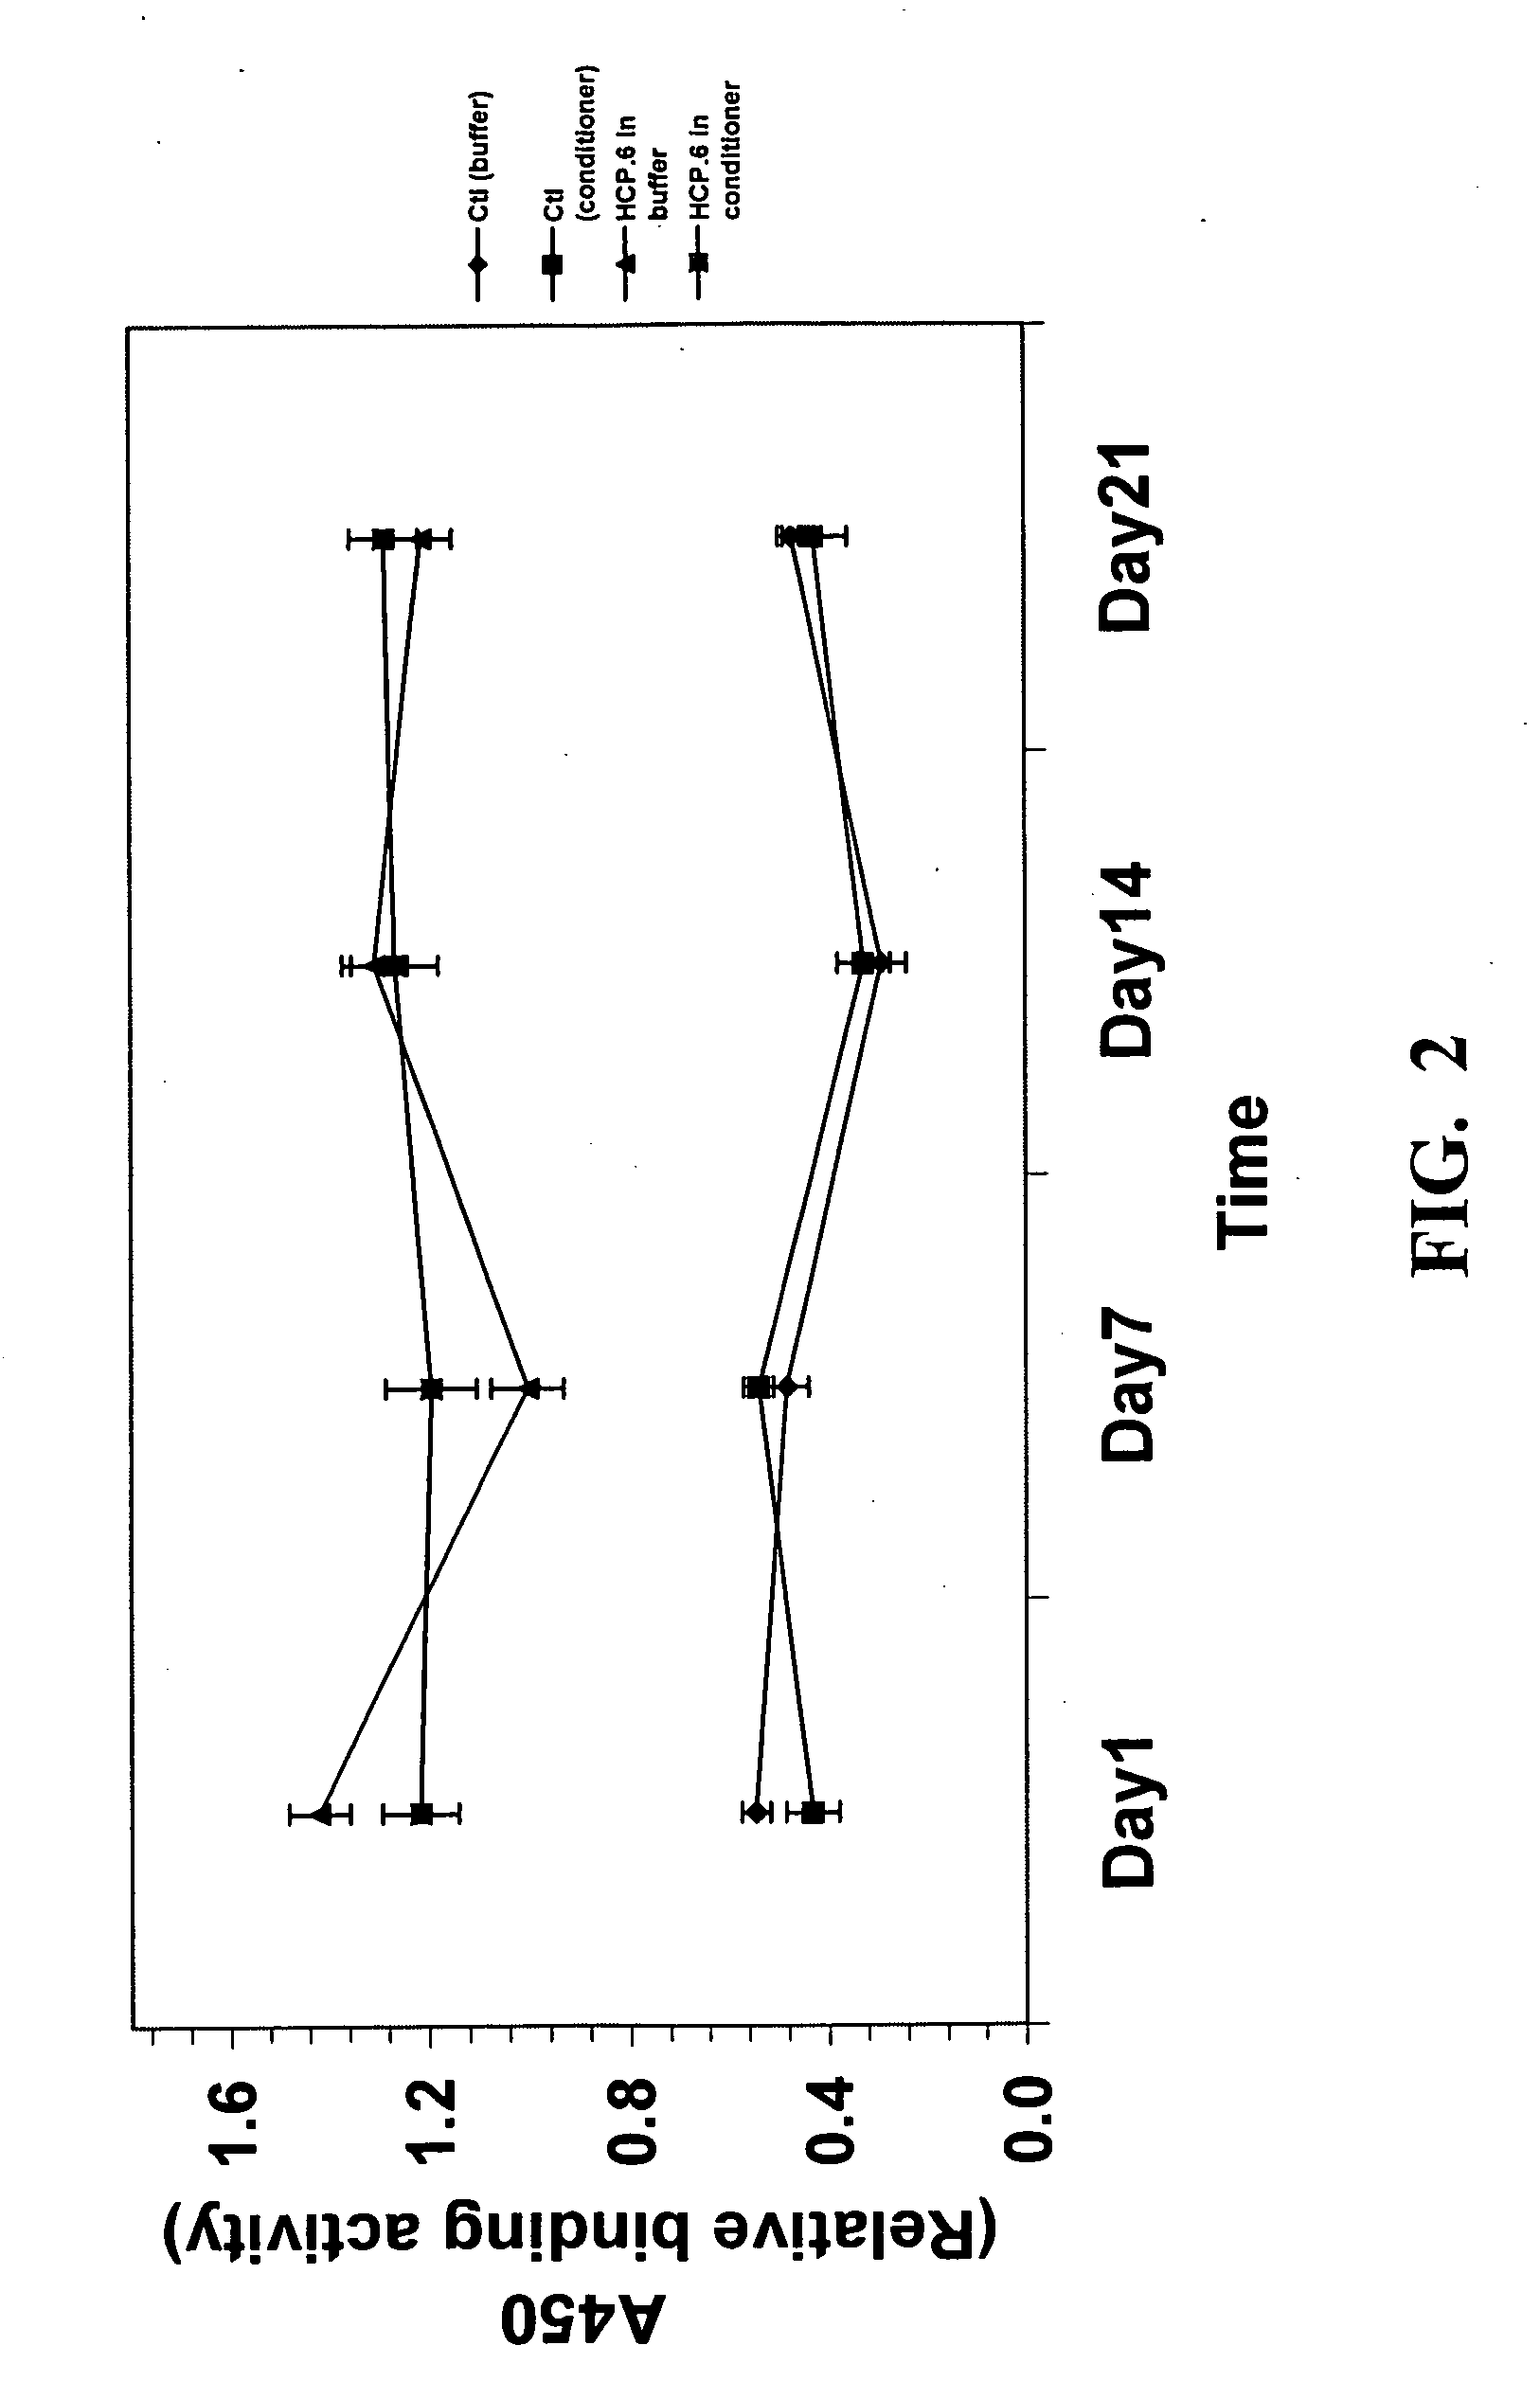 Method for identifying hair conditioner-resistant hair-binding peptides and hair benefit agents therefrom